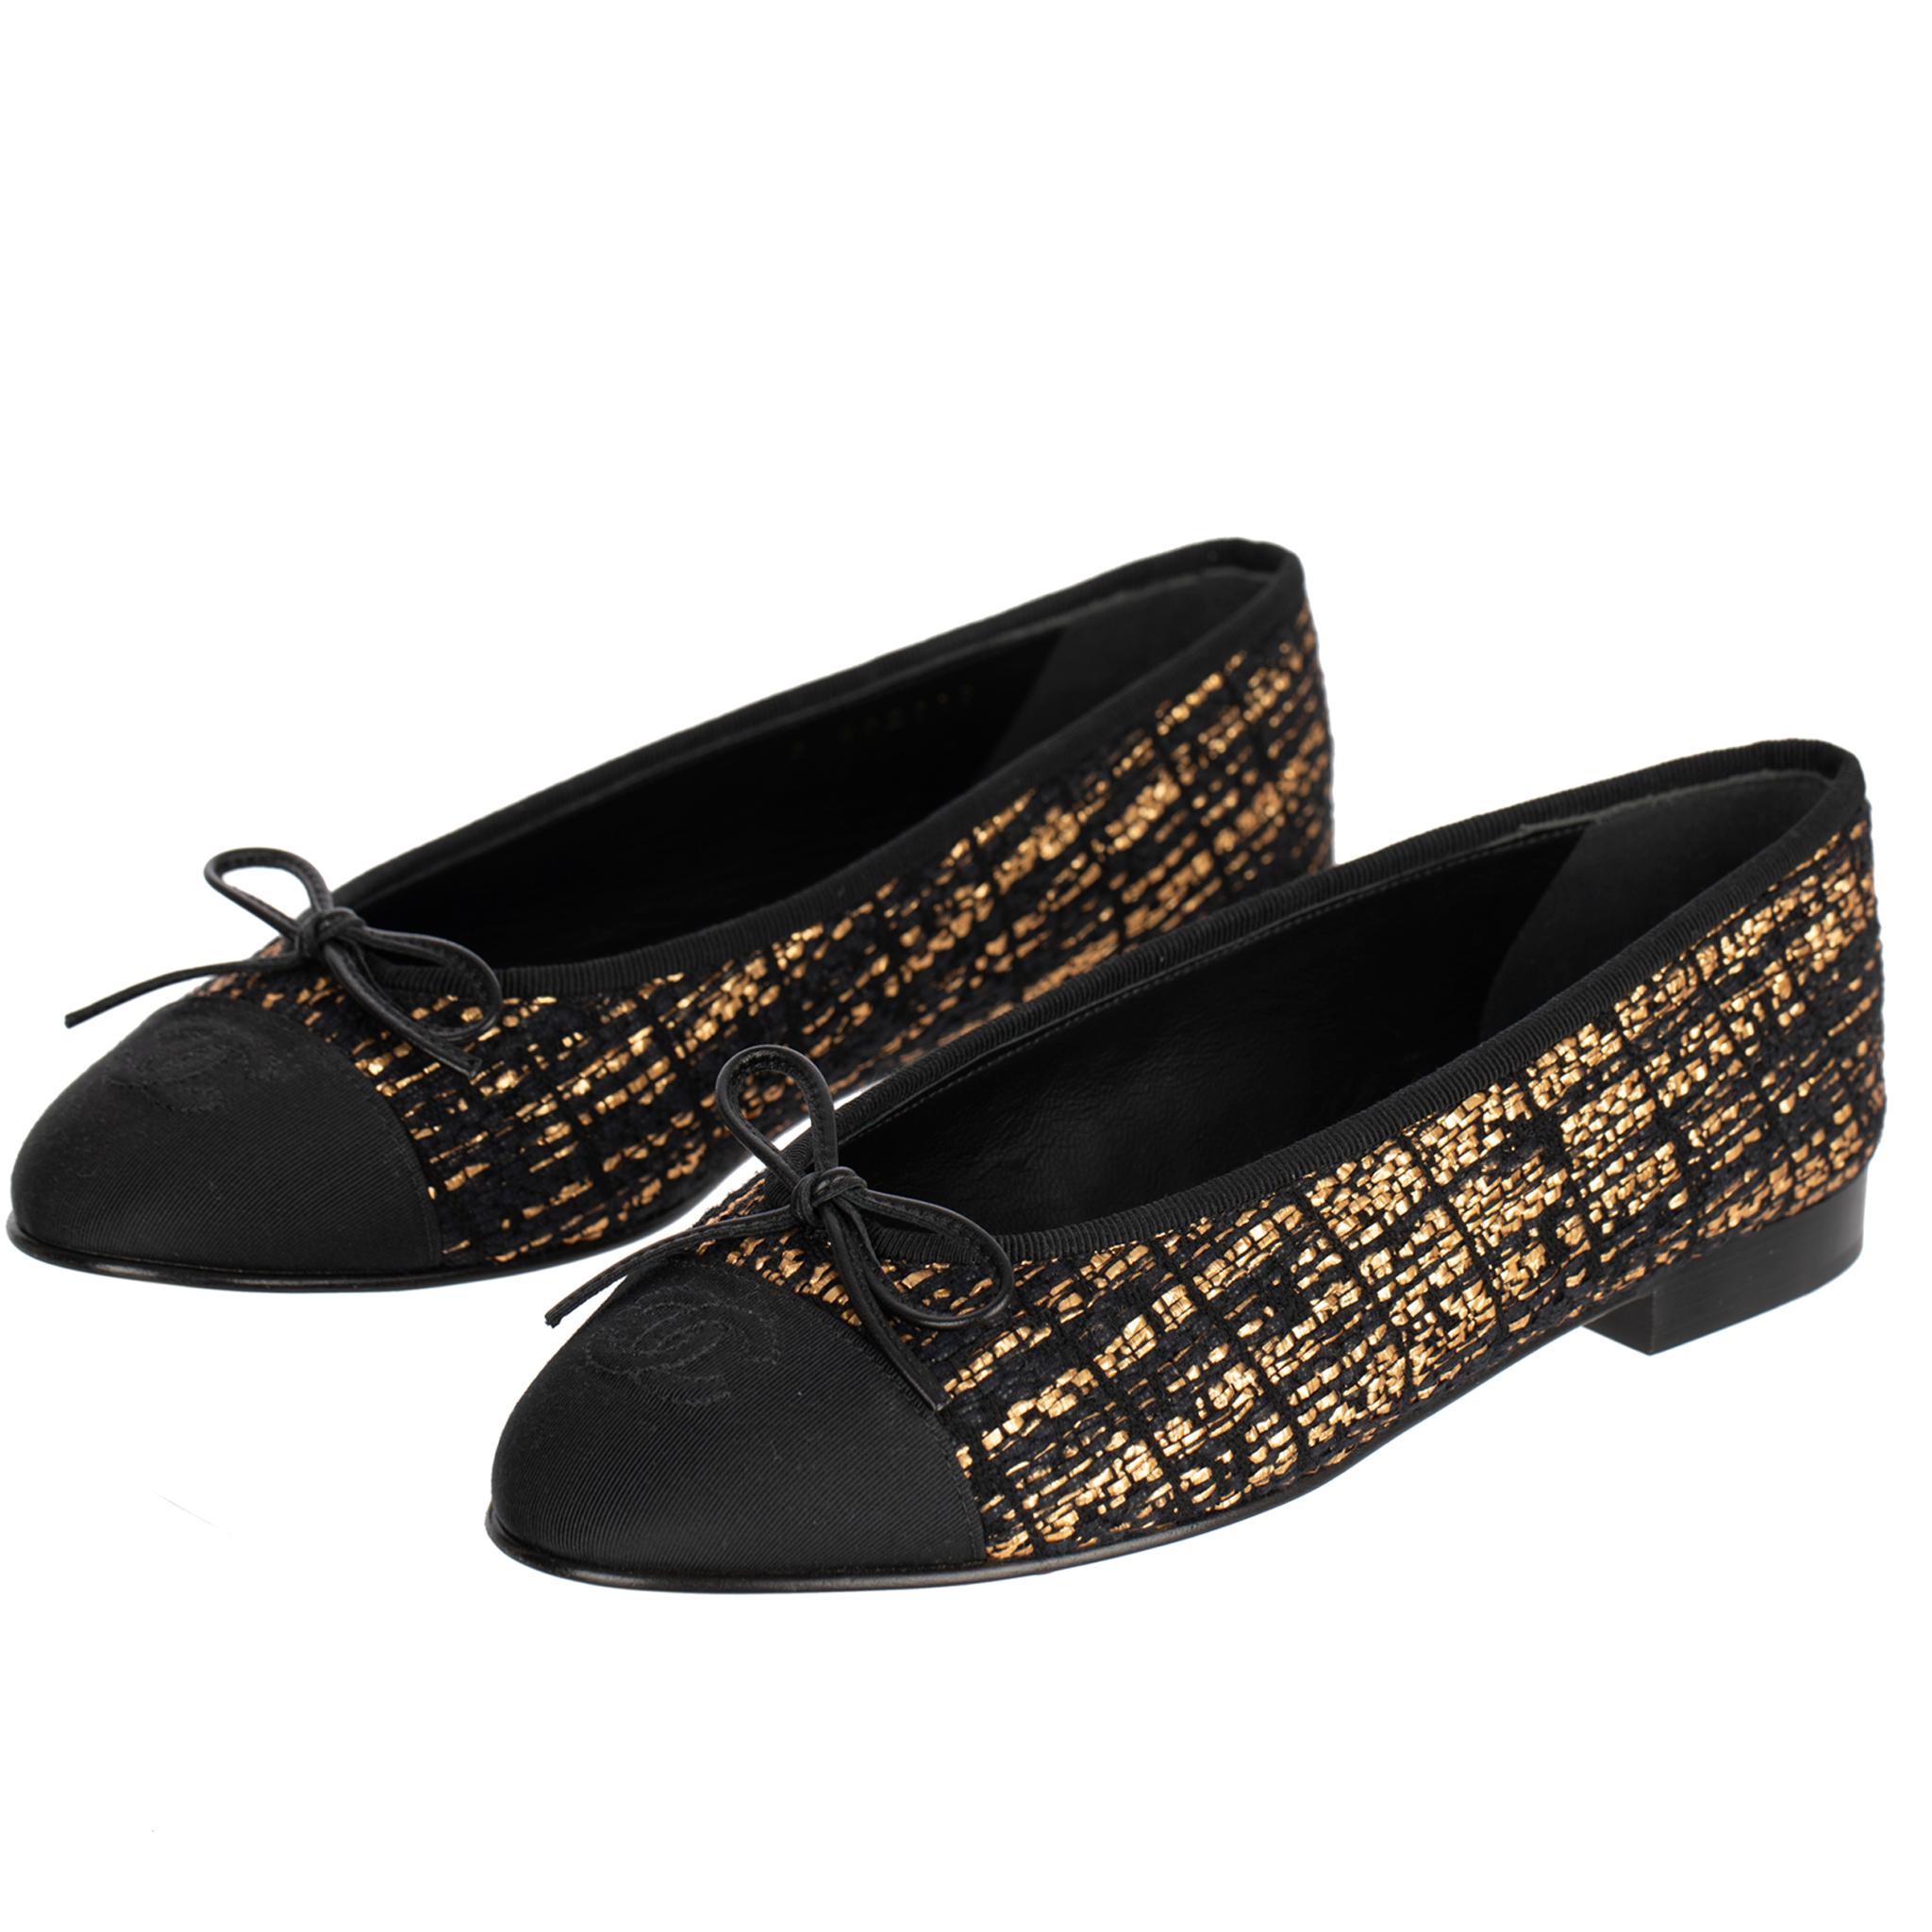 These Chanel Black & Gold Tweed ballet flats make a statement with their stylish classic design. Featuring an iconic tweed fabric, these flats are sure to make any look stand out. Crafted in size 37FR for a perfect fit.

Brand: Chanel

Product: